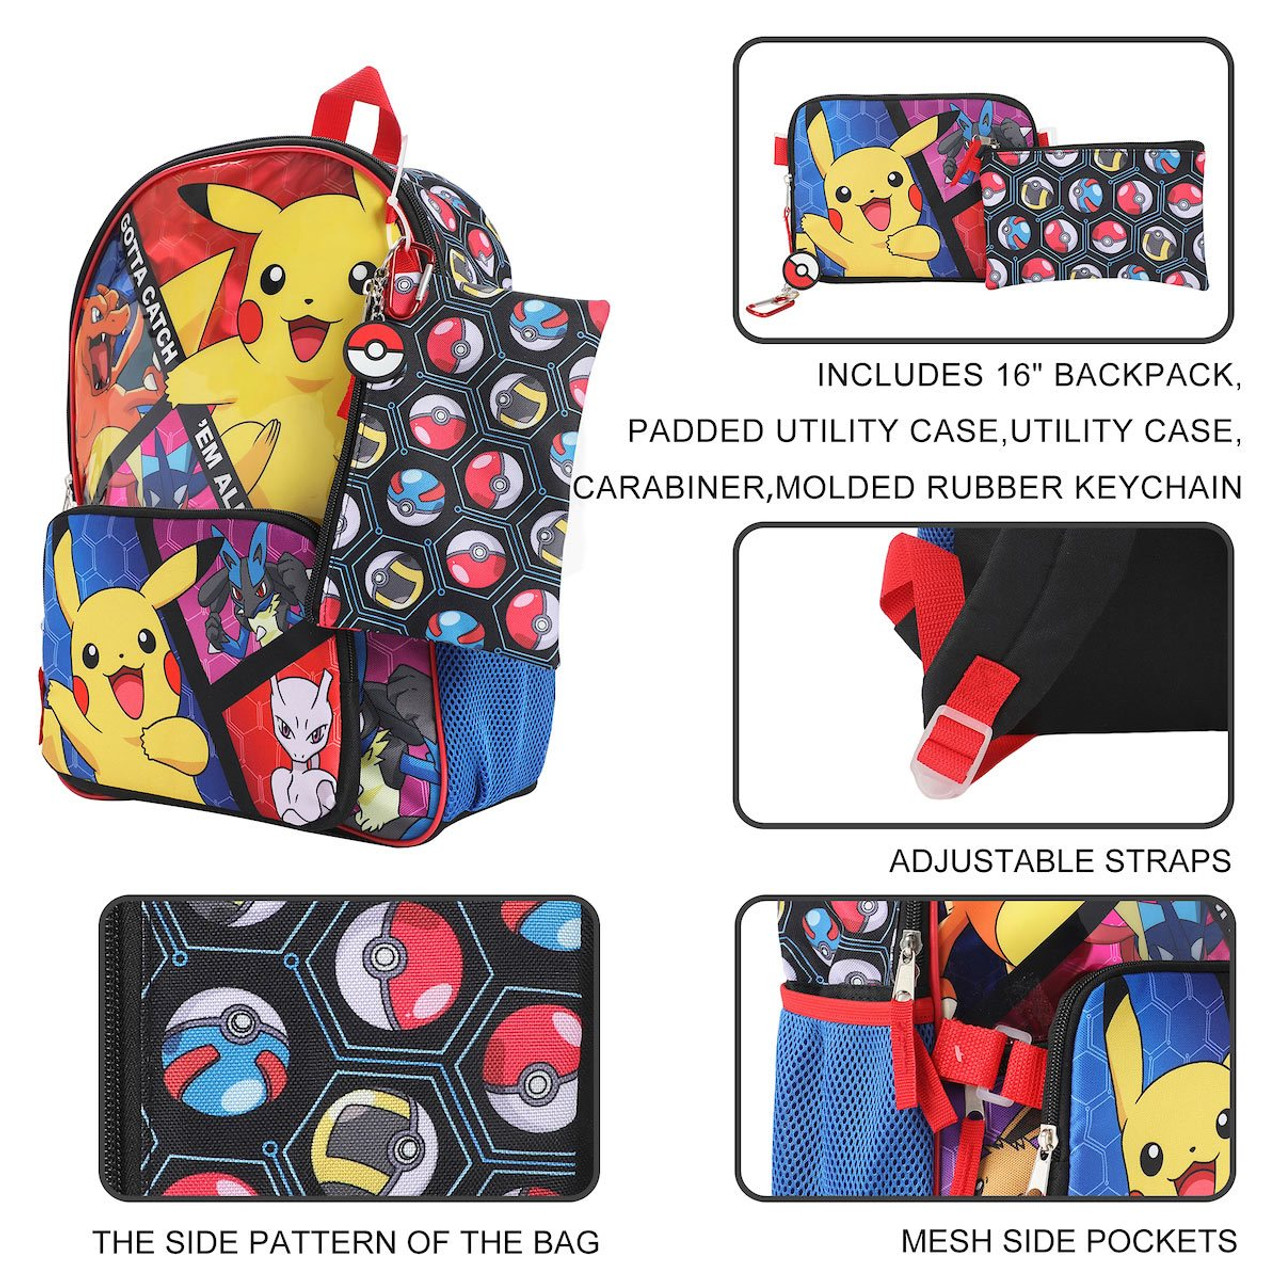 Mavin  2020 Pokemon Carry Case Playset Backpack With 25 Mixed Figures  Charizard Pikachu